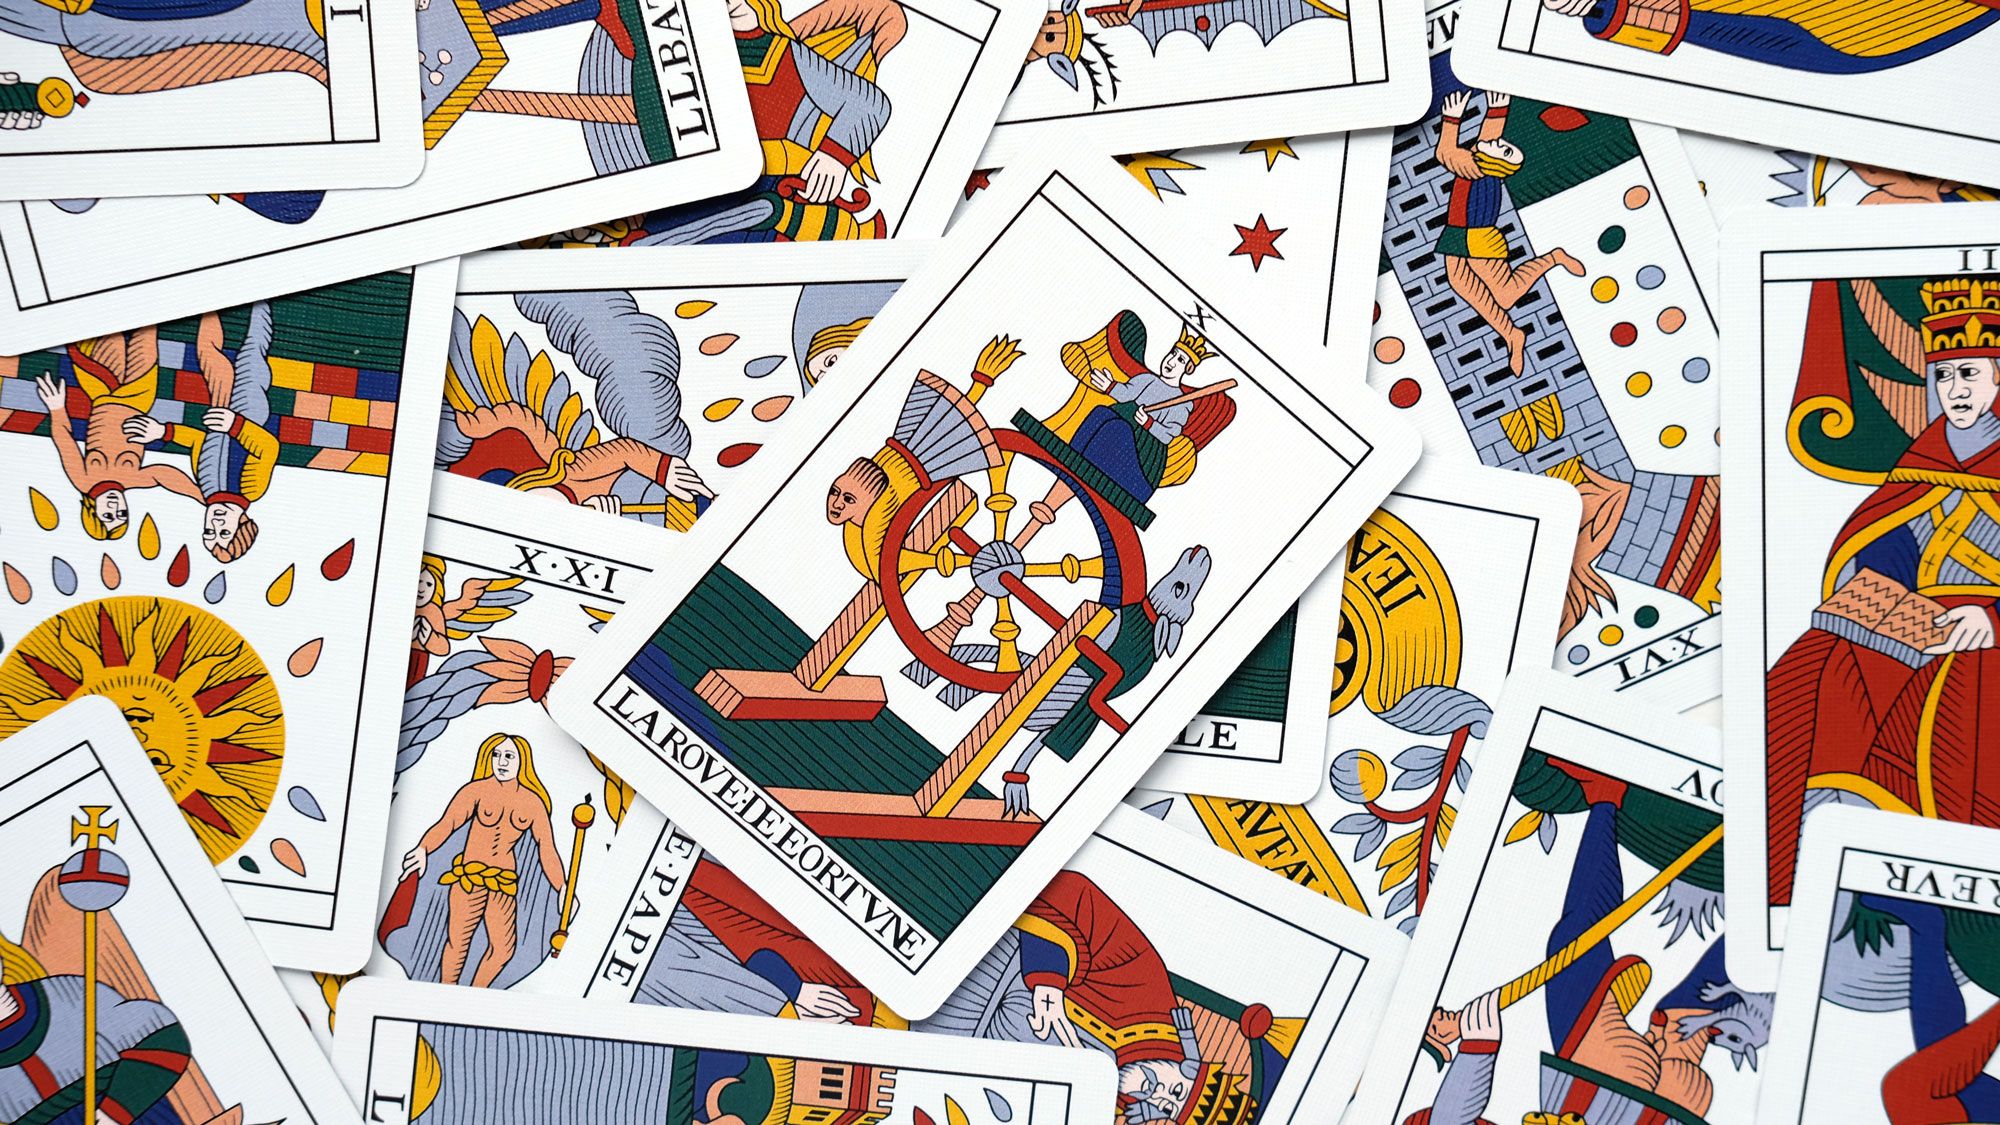 Introduction to the Tarot